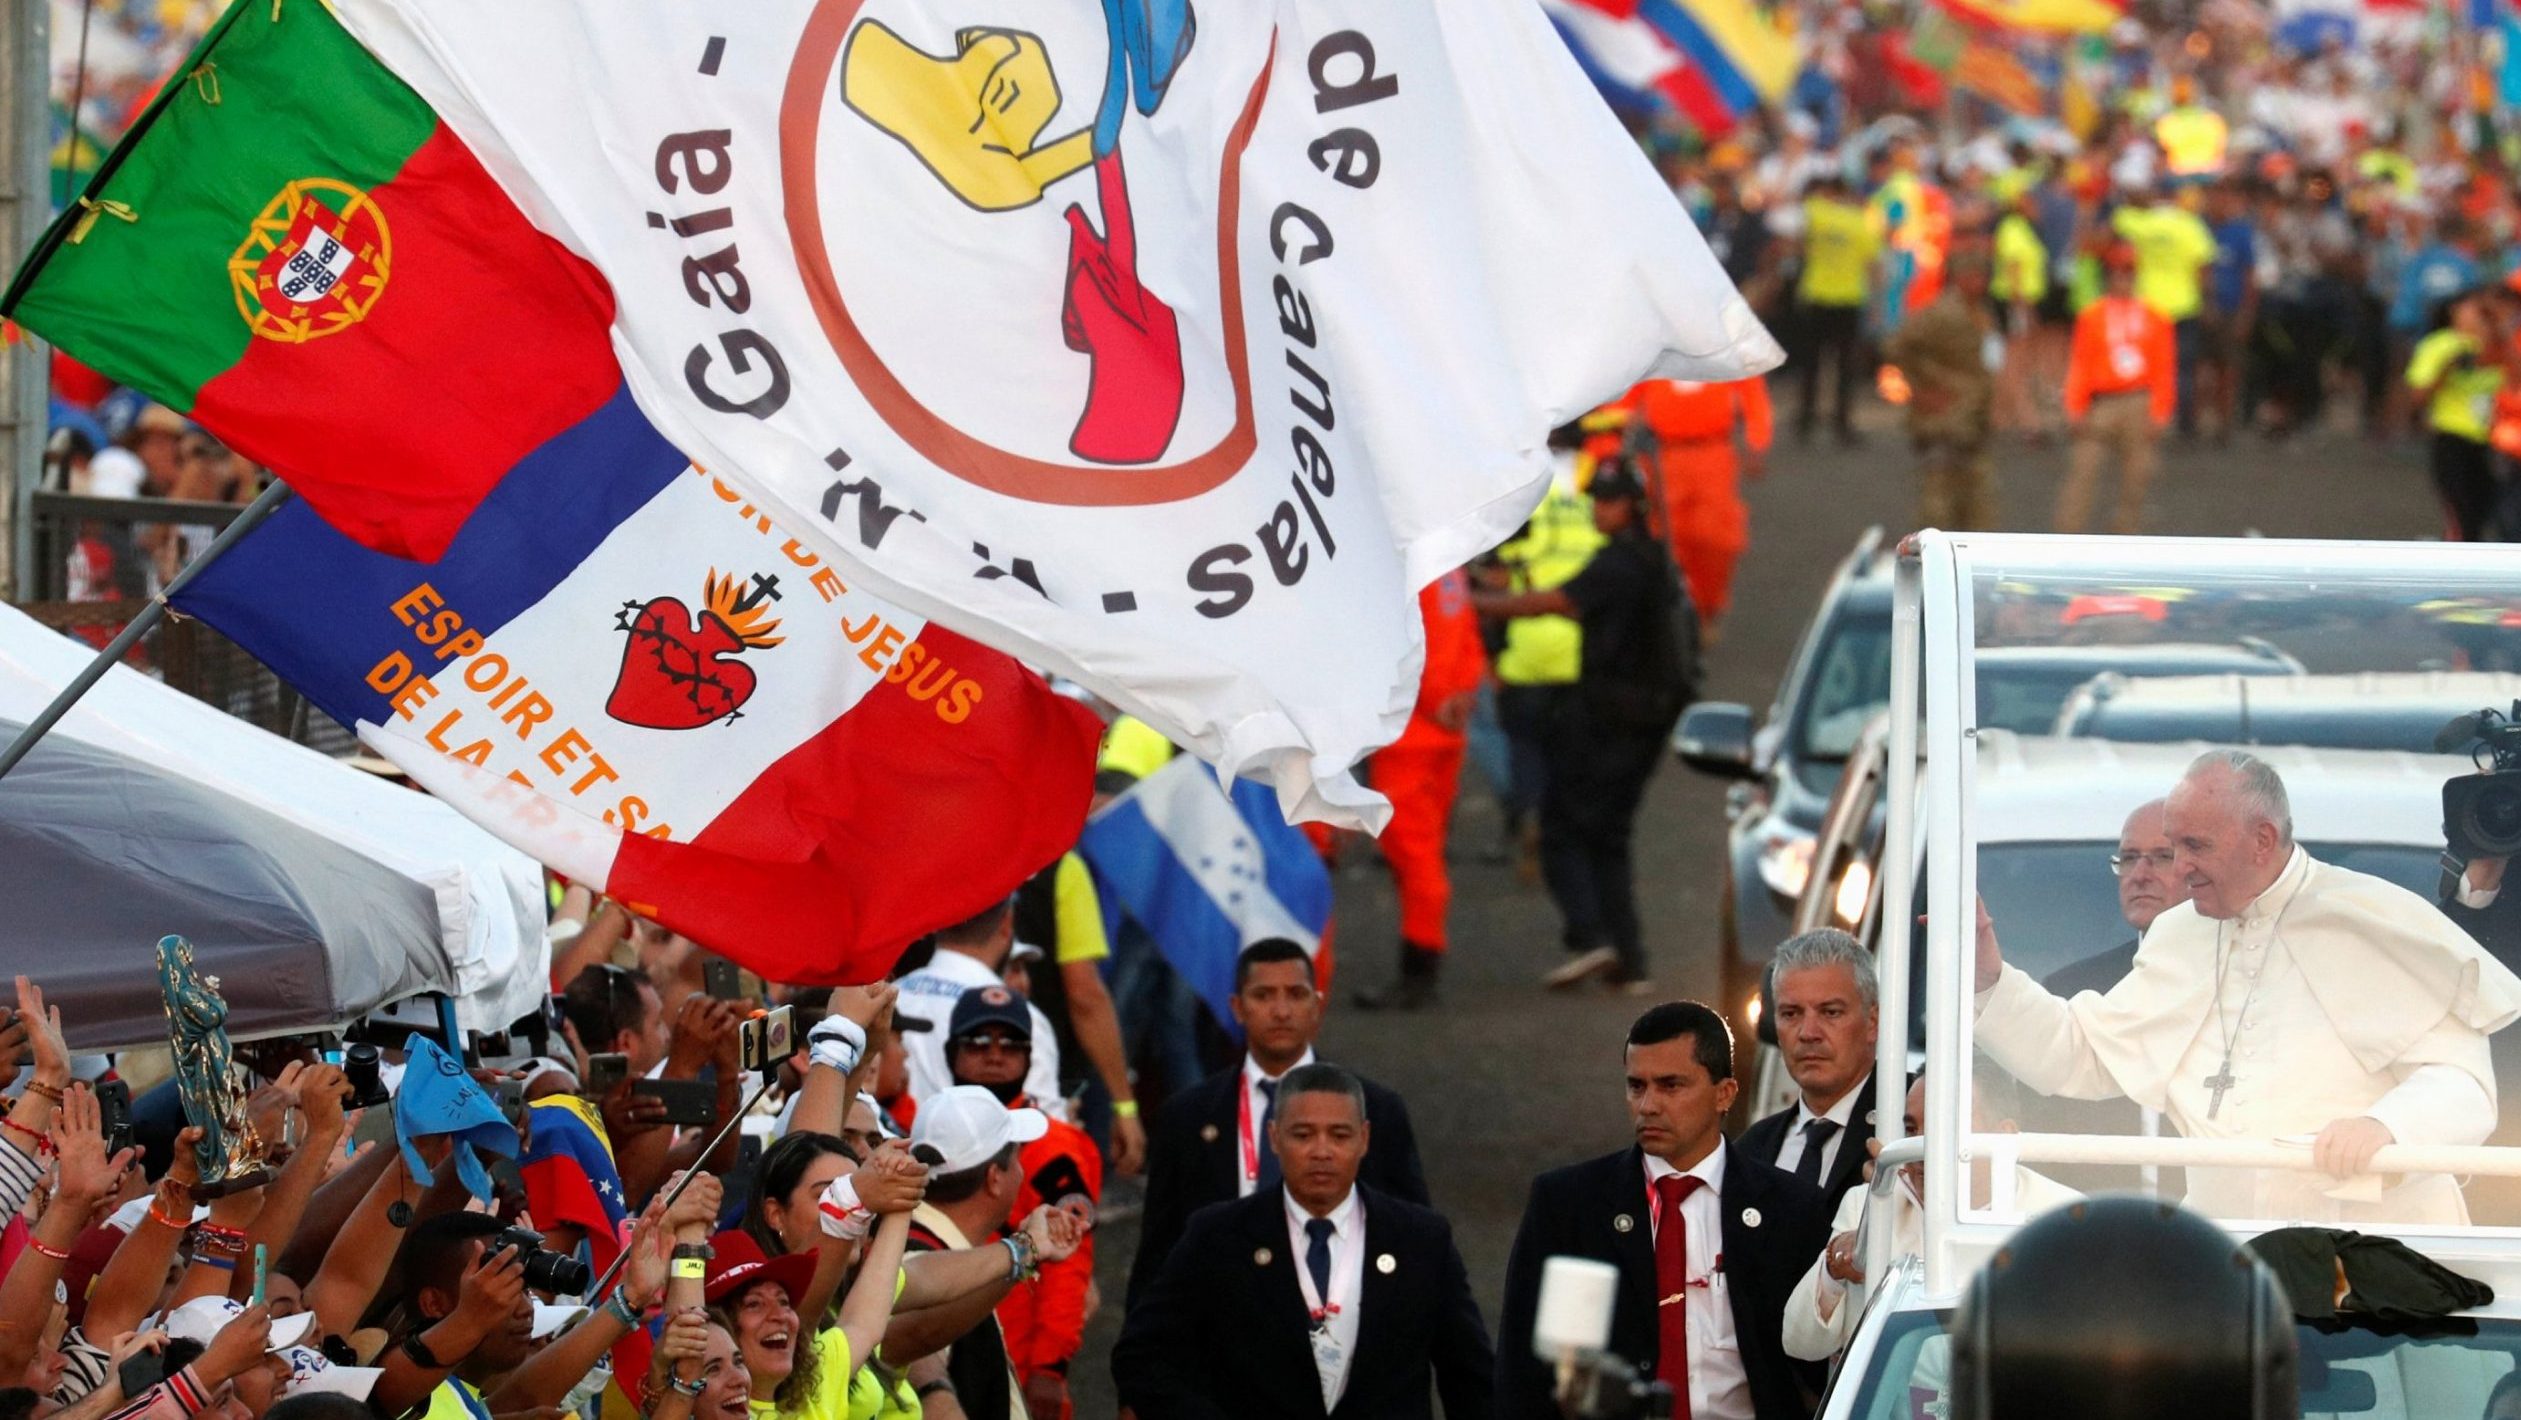 USCCB official sees enthusiasm building for WYD 2023 in Lisbon, Portugal